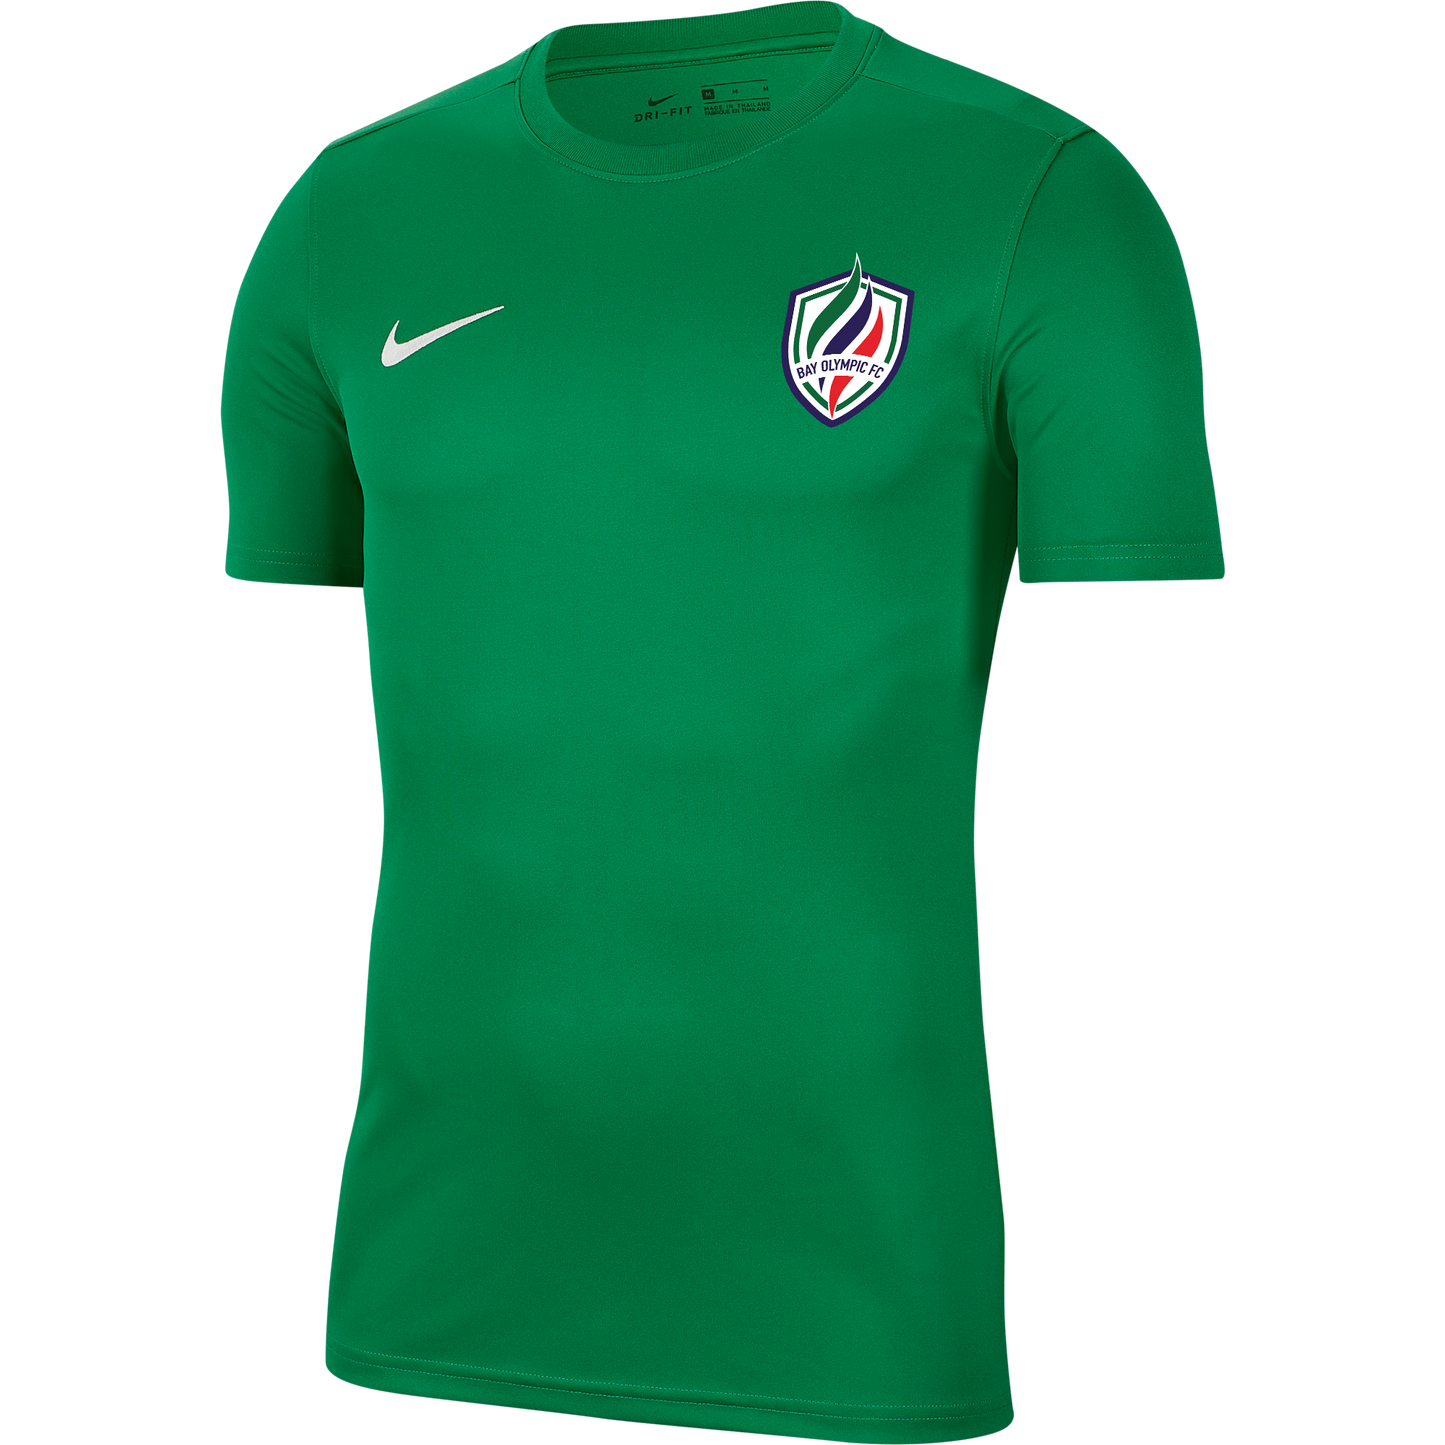 BAY OLYMPIC FC NIKE PARK VII HOME JERSEY - MEN'S